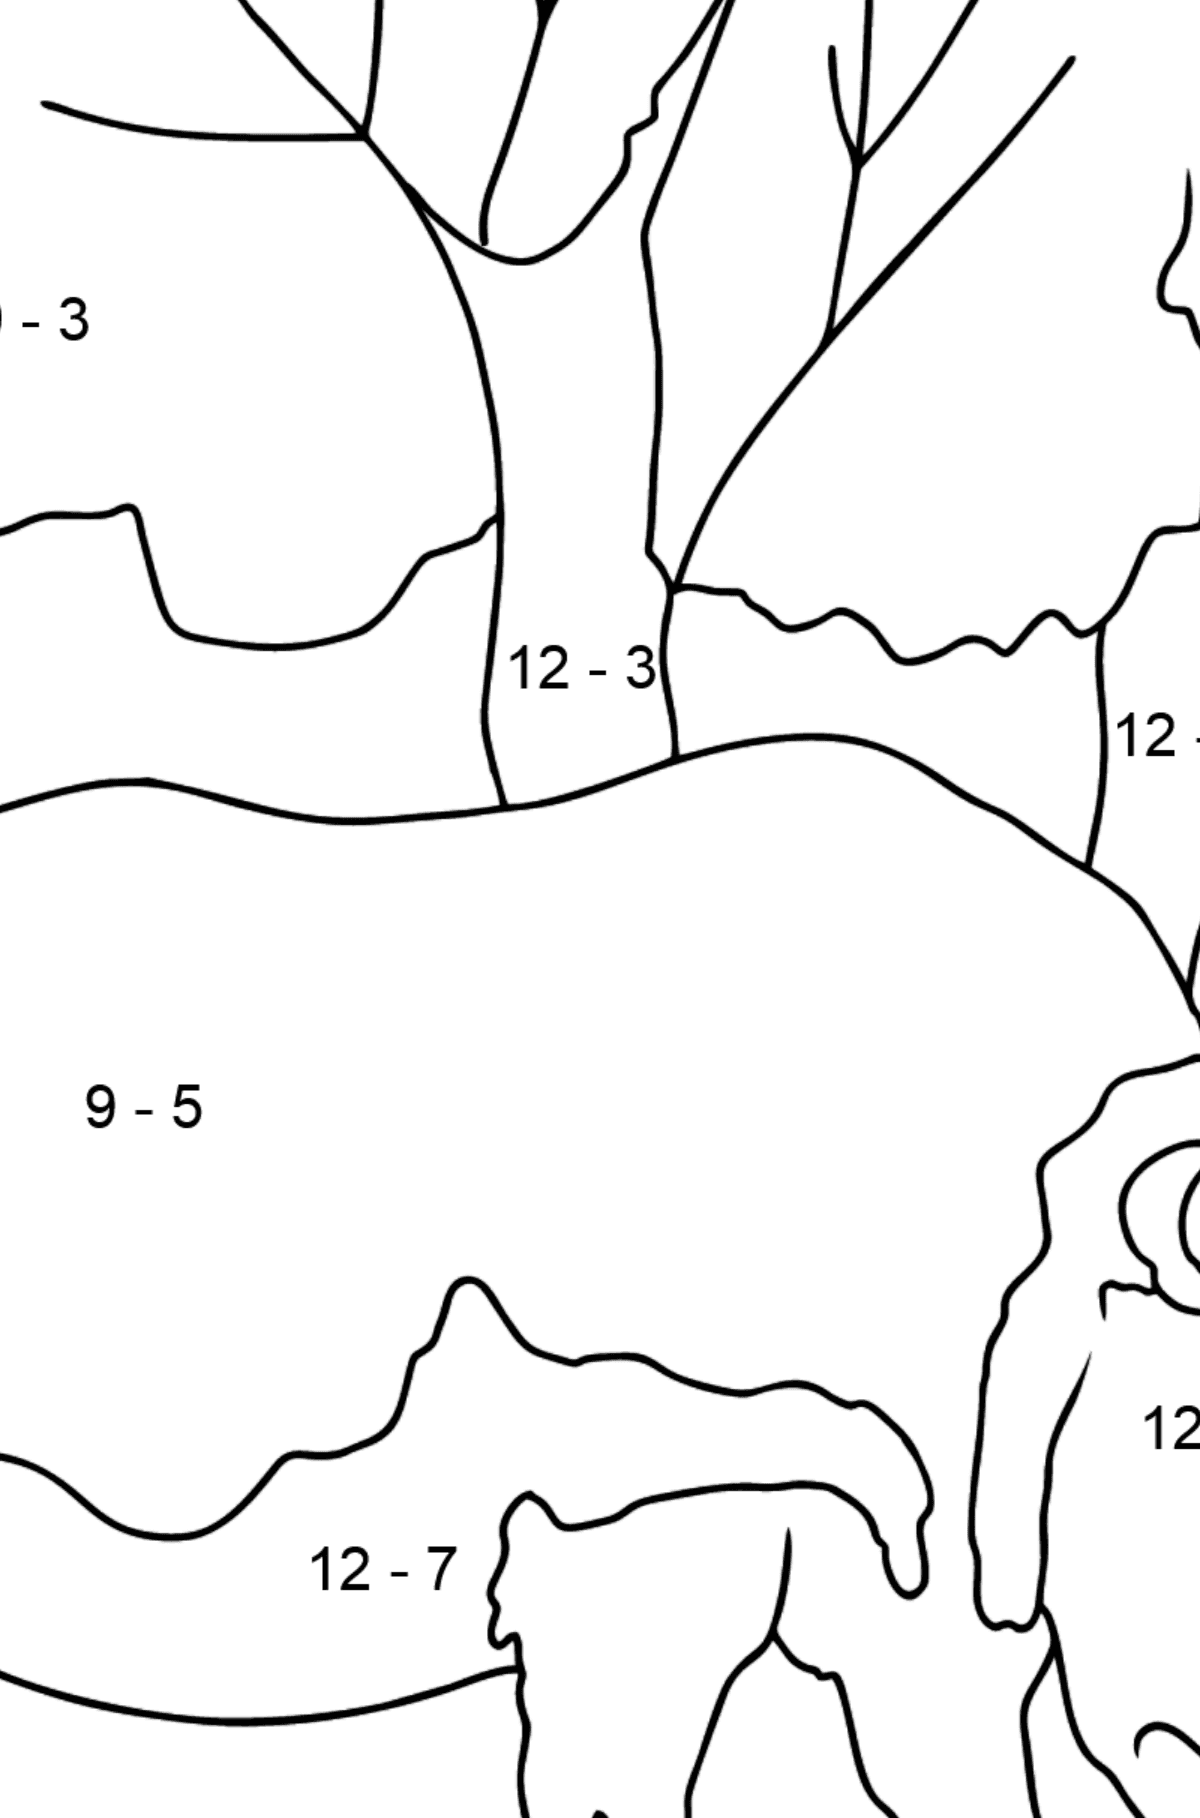 Coloring Page - A Rhino is Eating Grass - Math Coloring - Subtraction for Kids